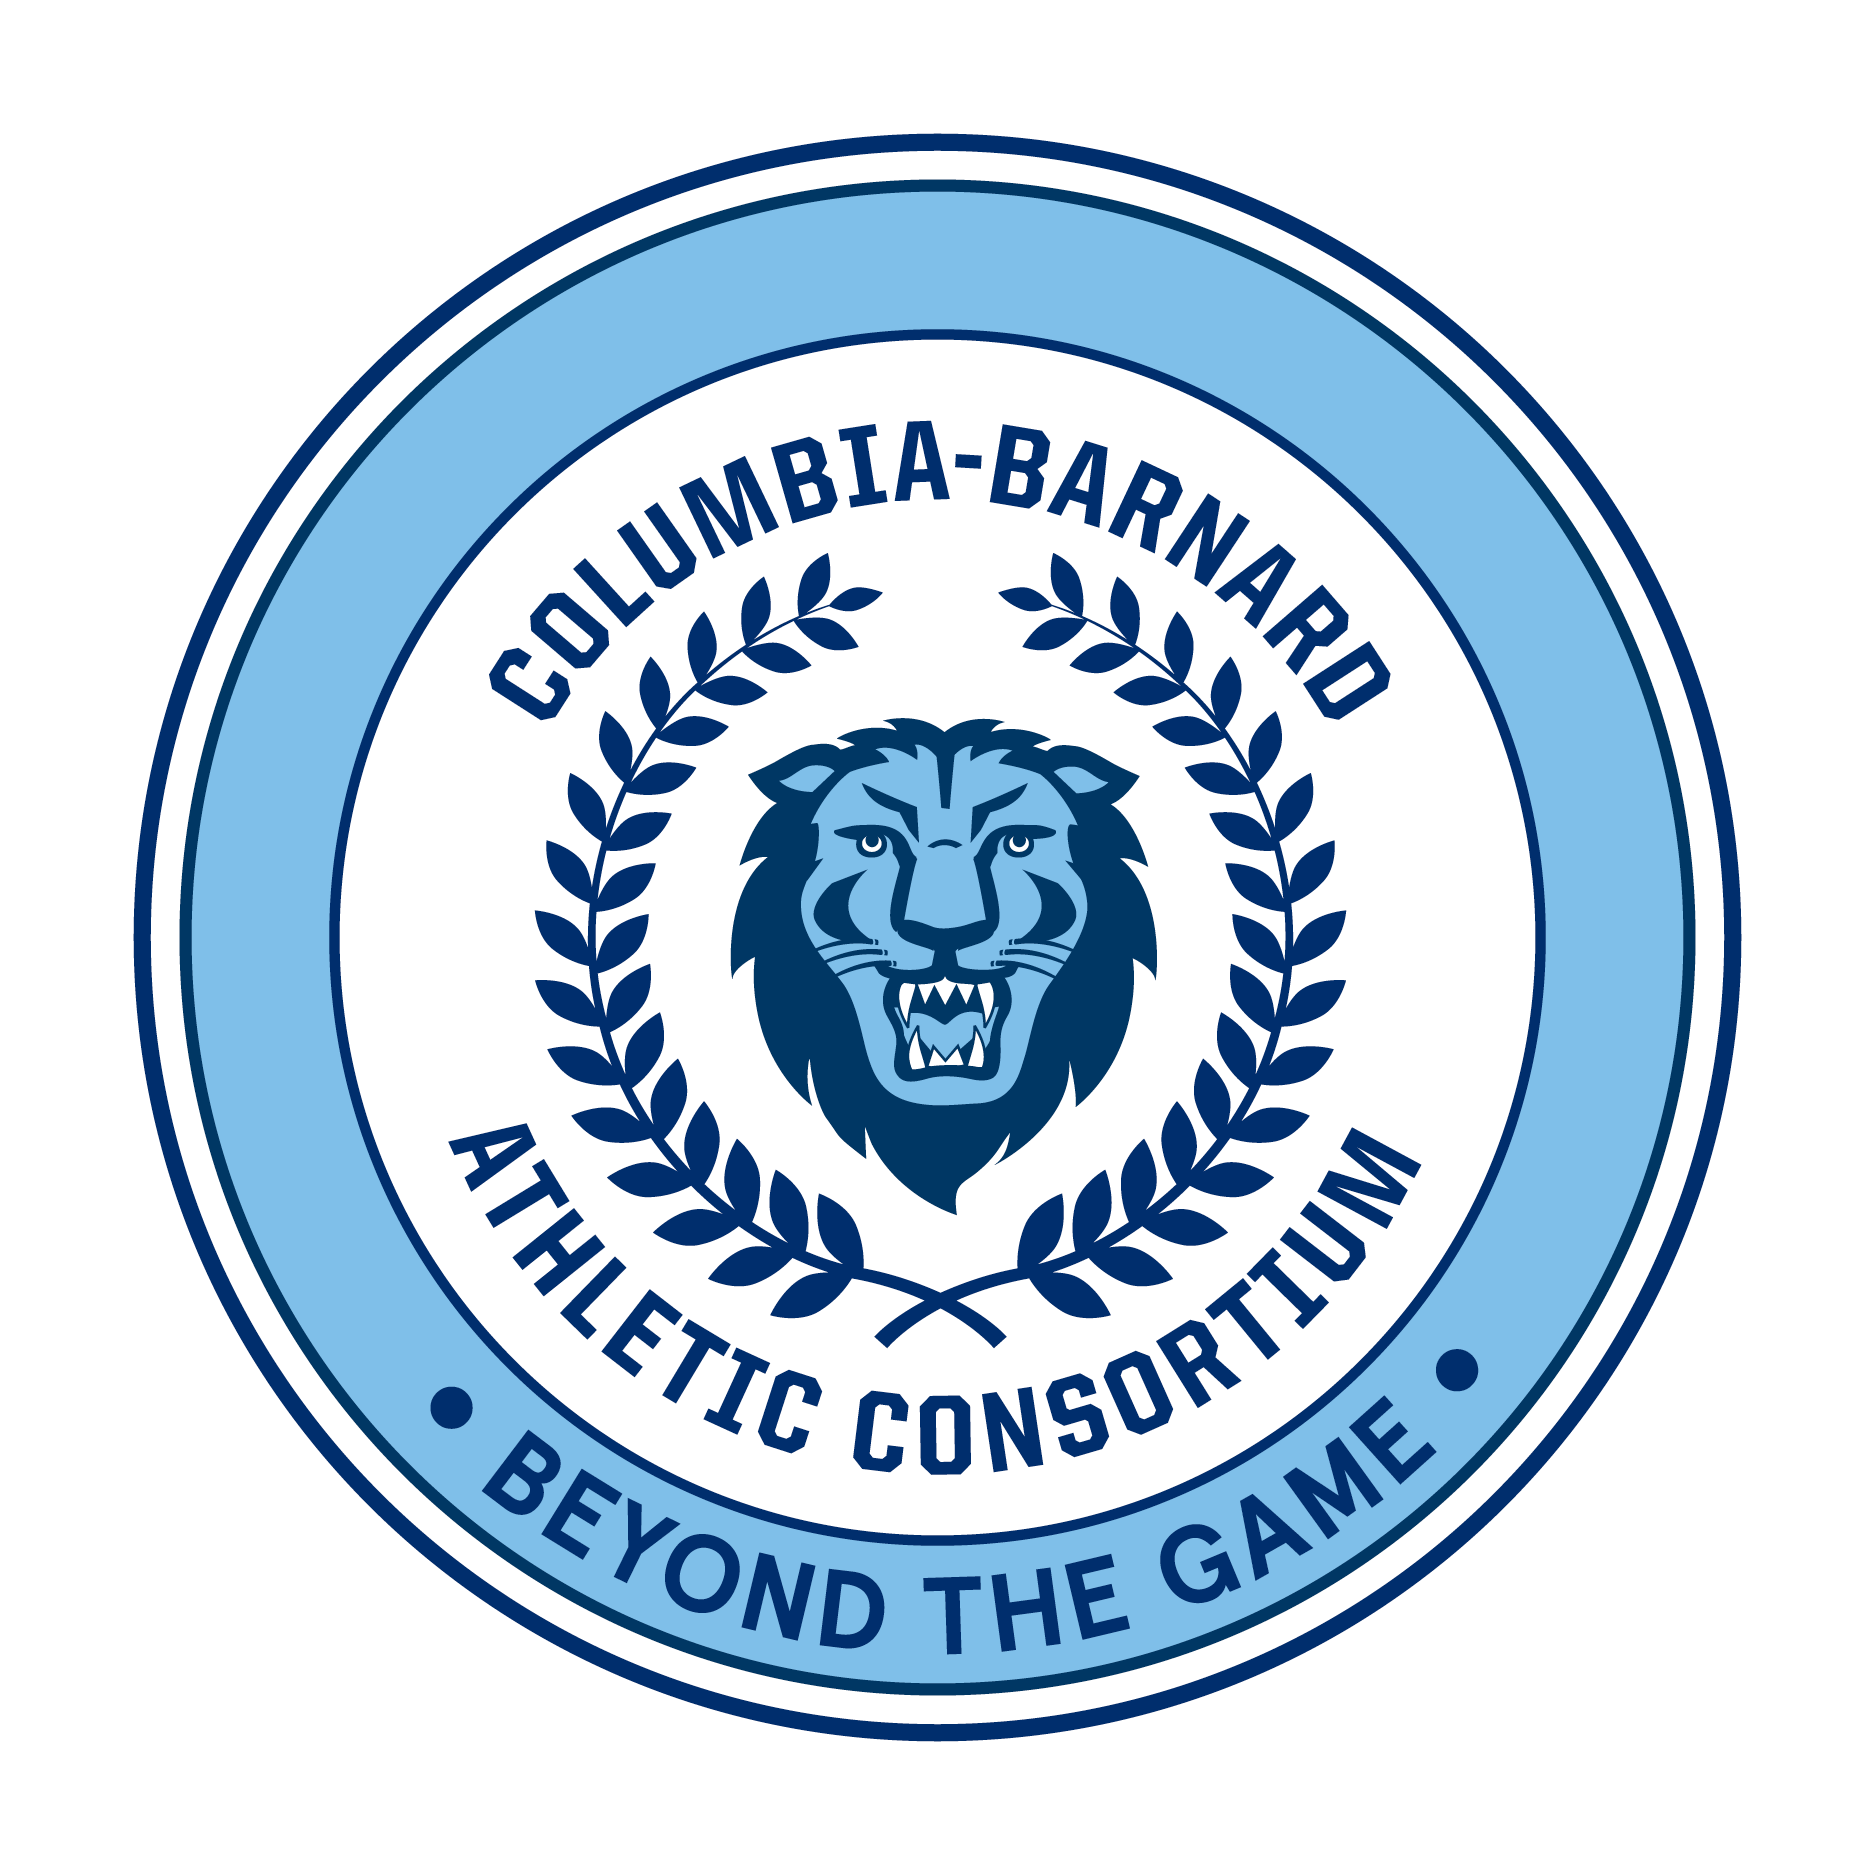 The Columbia-Barnard Athletic Consortium logo featuring the Columbia lion inside the Barnard laurels with the "Beyond the Game" event name featured in the circle